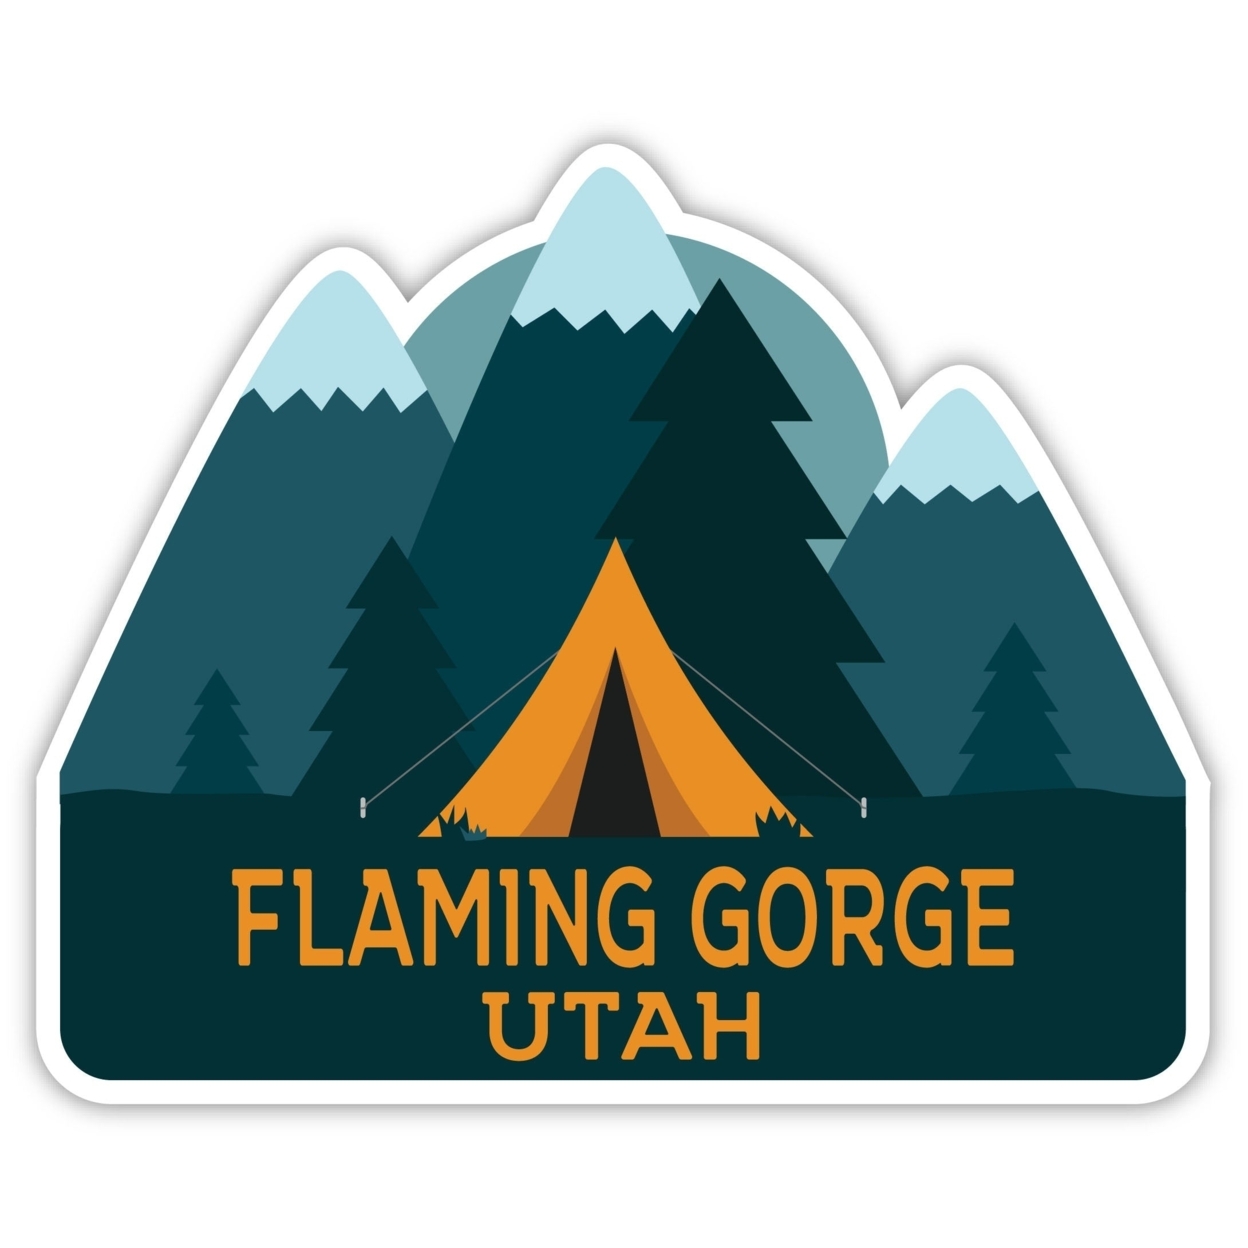 Flaming Gorge Utah Souvenir Decorative Stickers (Choose Theme And Size) - 4-Pack, 8-Inch, Camp Life